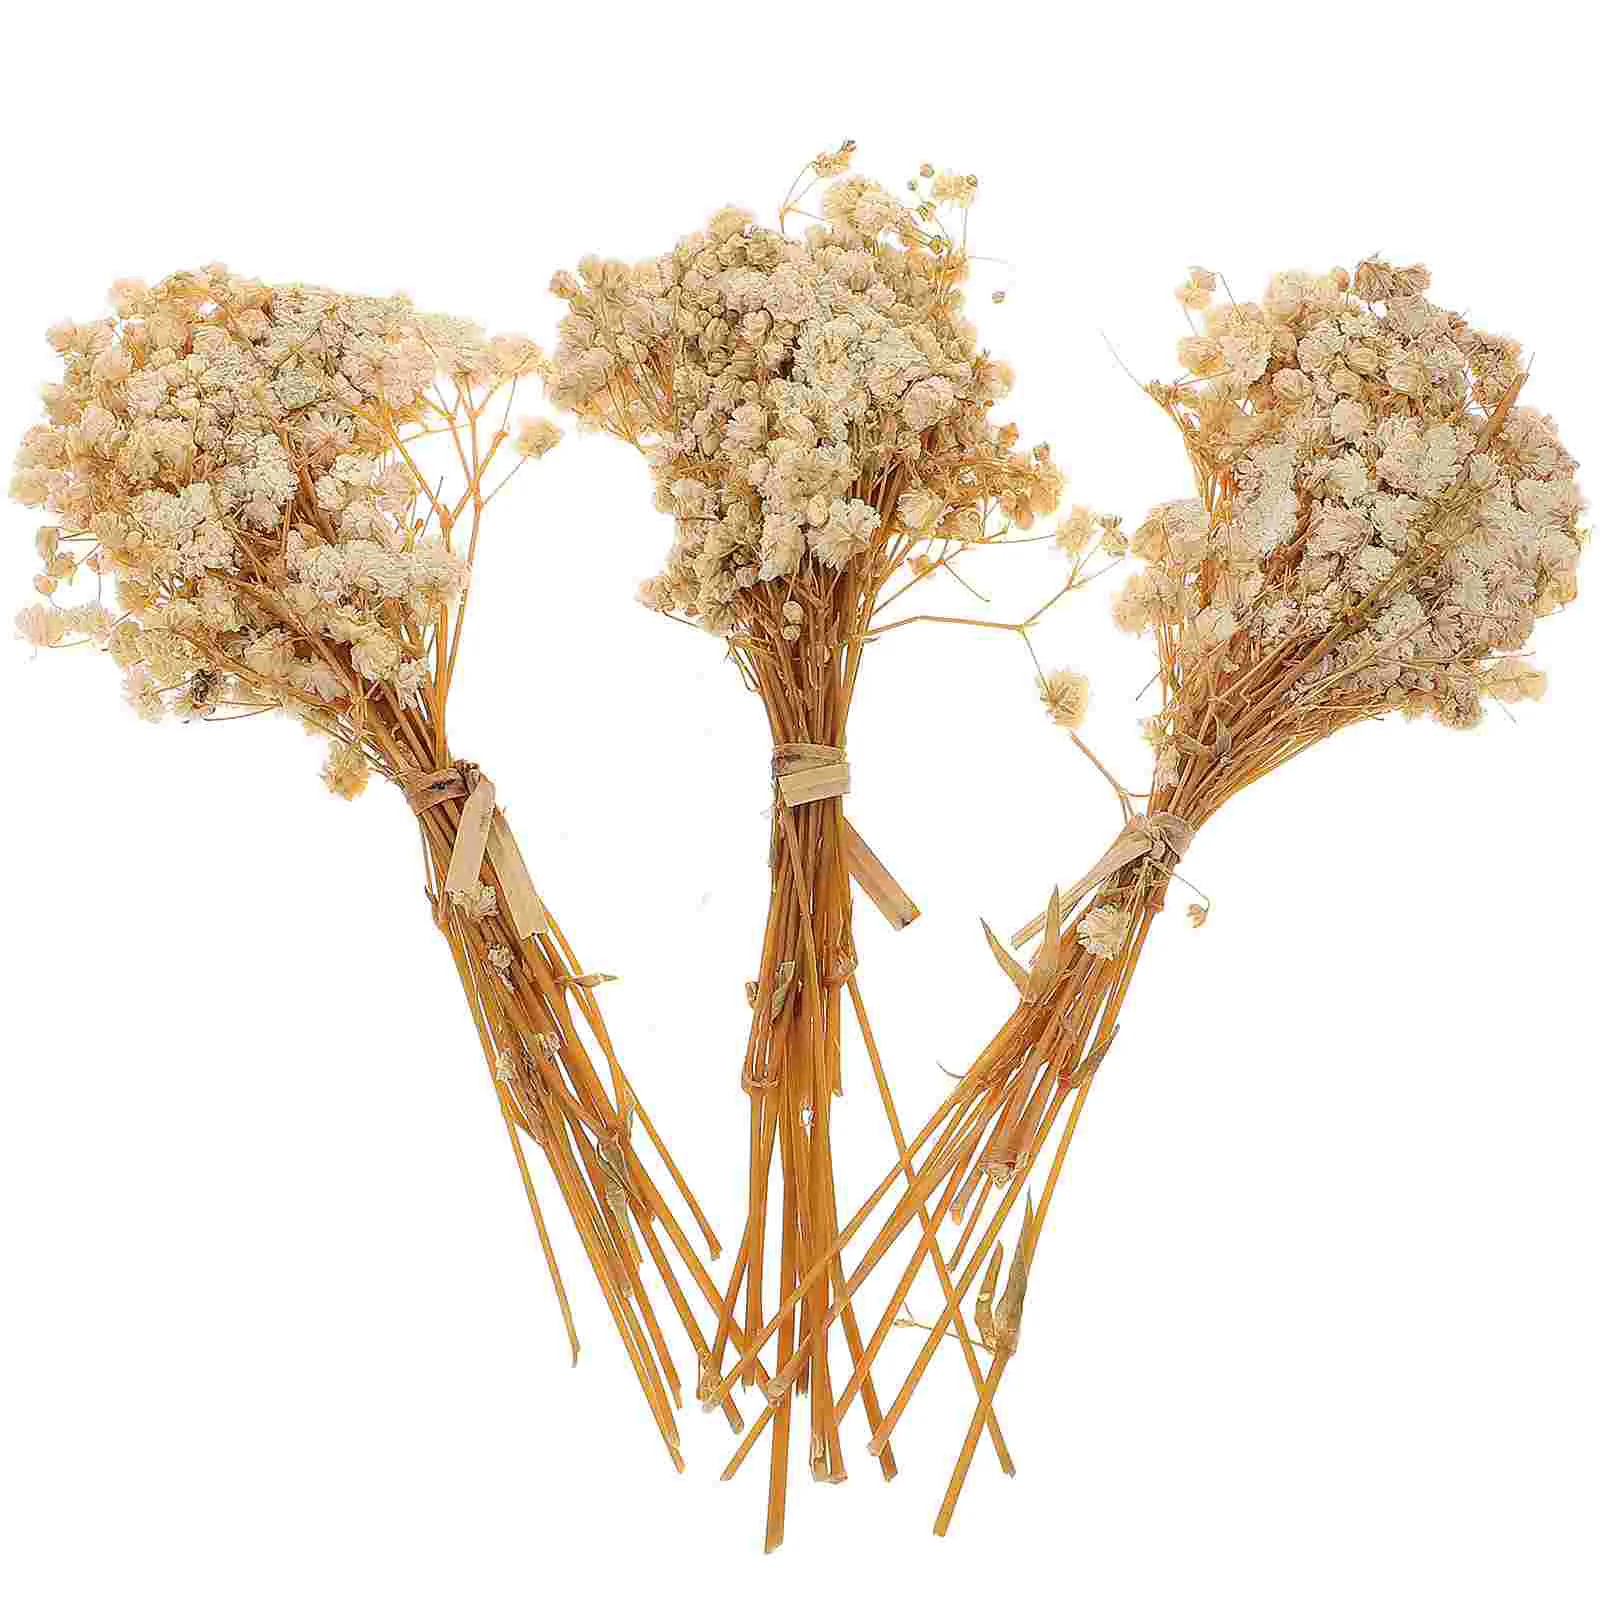 

3 Bunches Natural Dried Flowers Bouquet Dried Grass Gypsophila for Filler Floral Arrangement DIY Home Fall Party Decor ( )